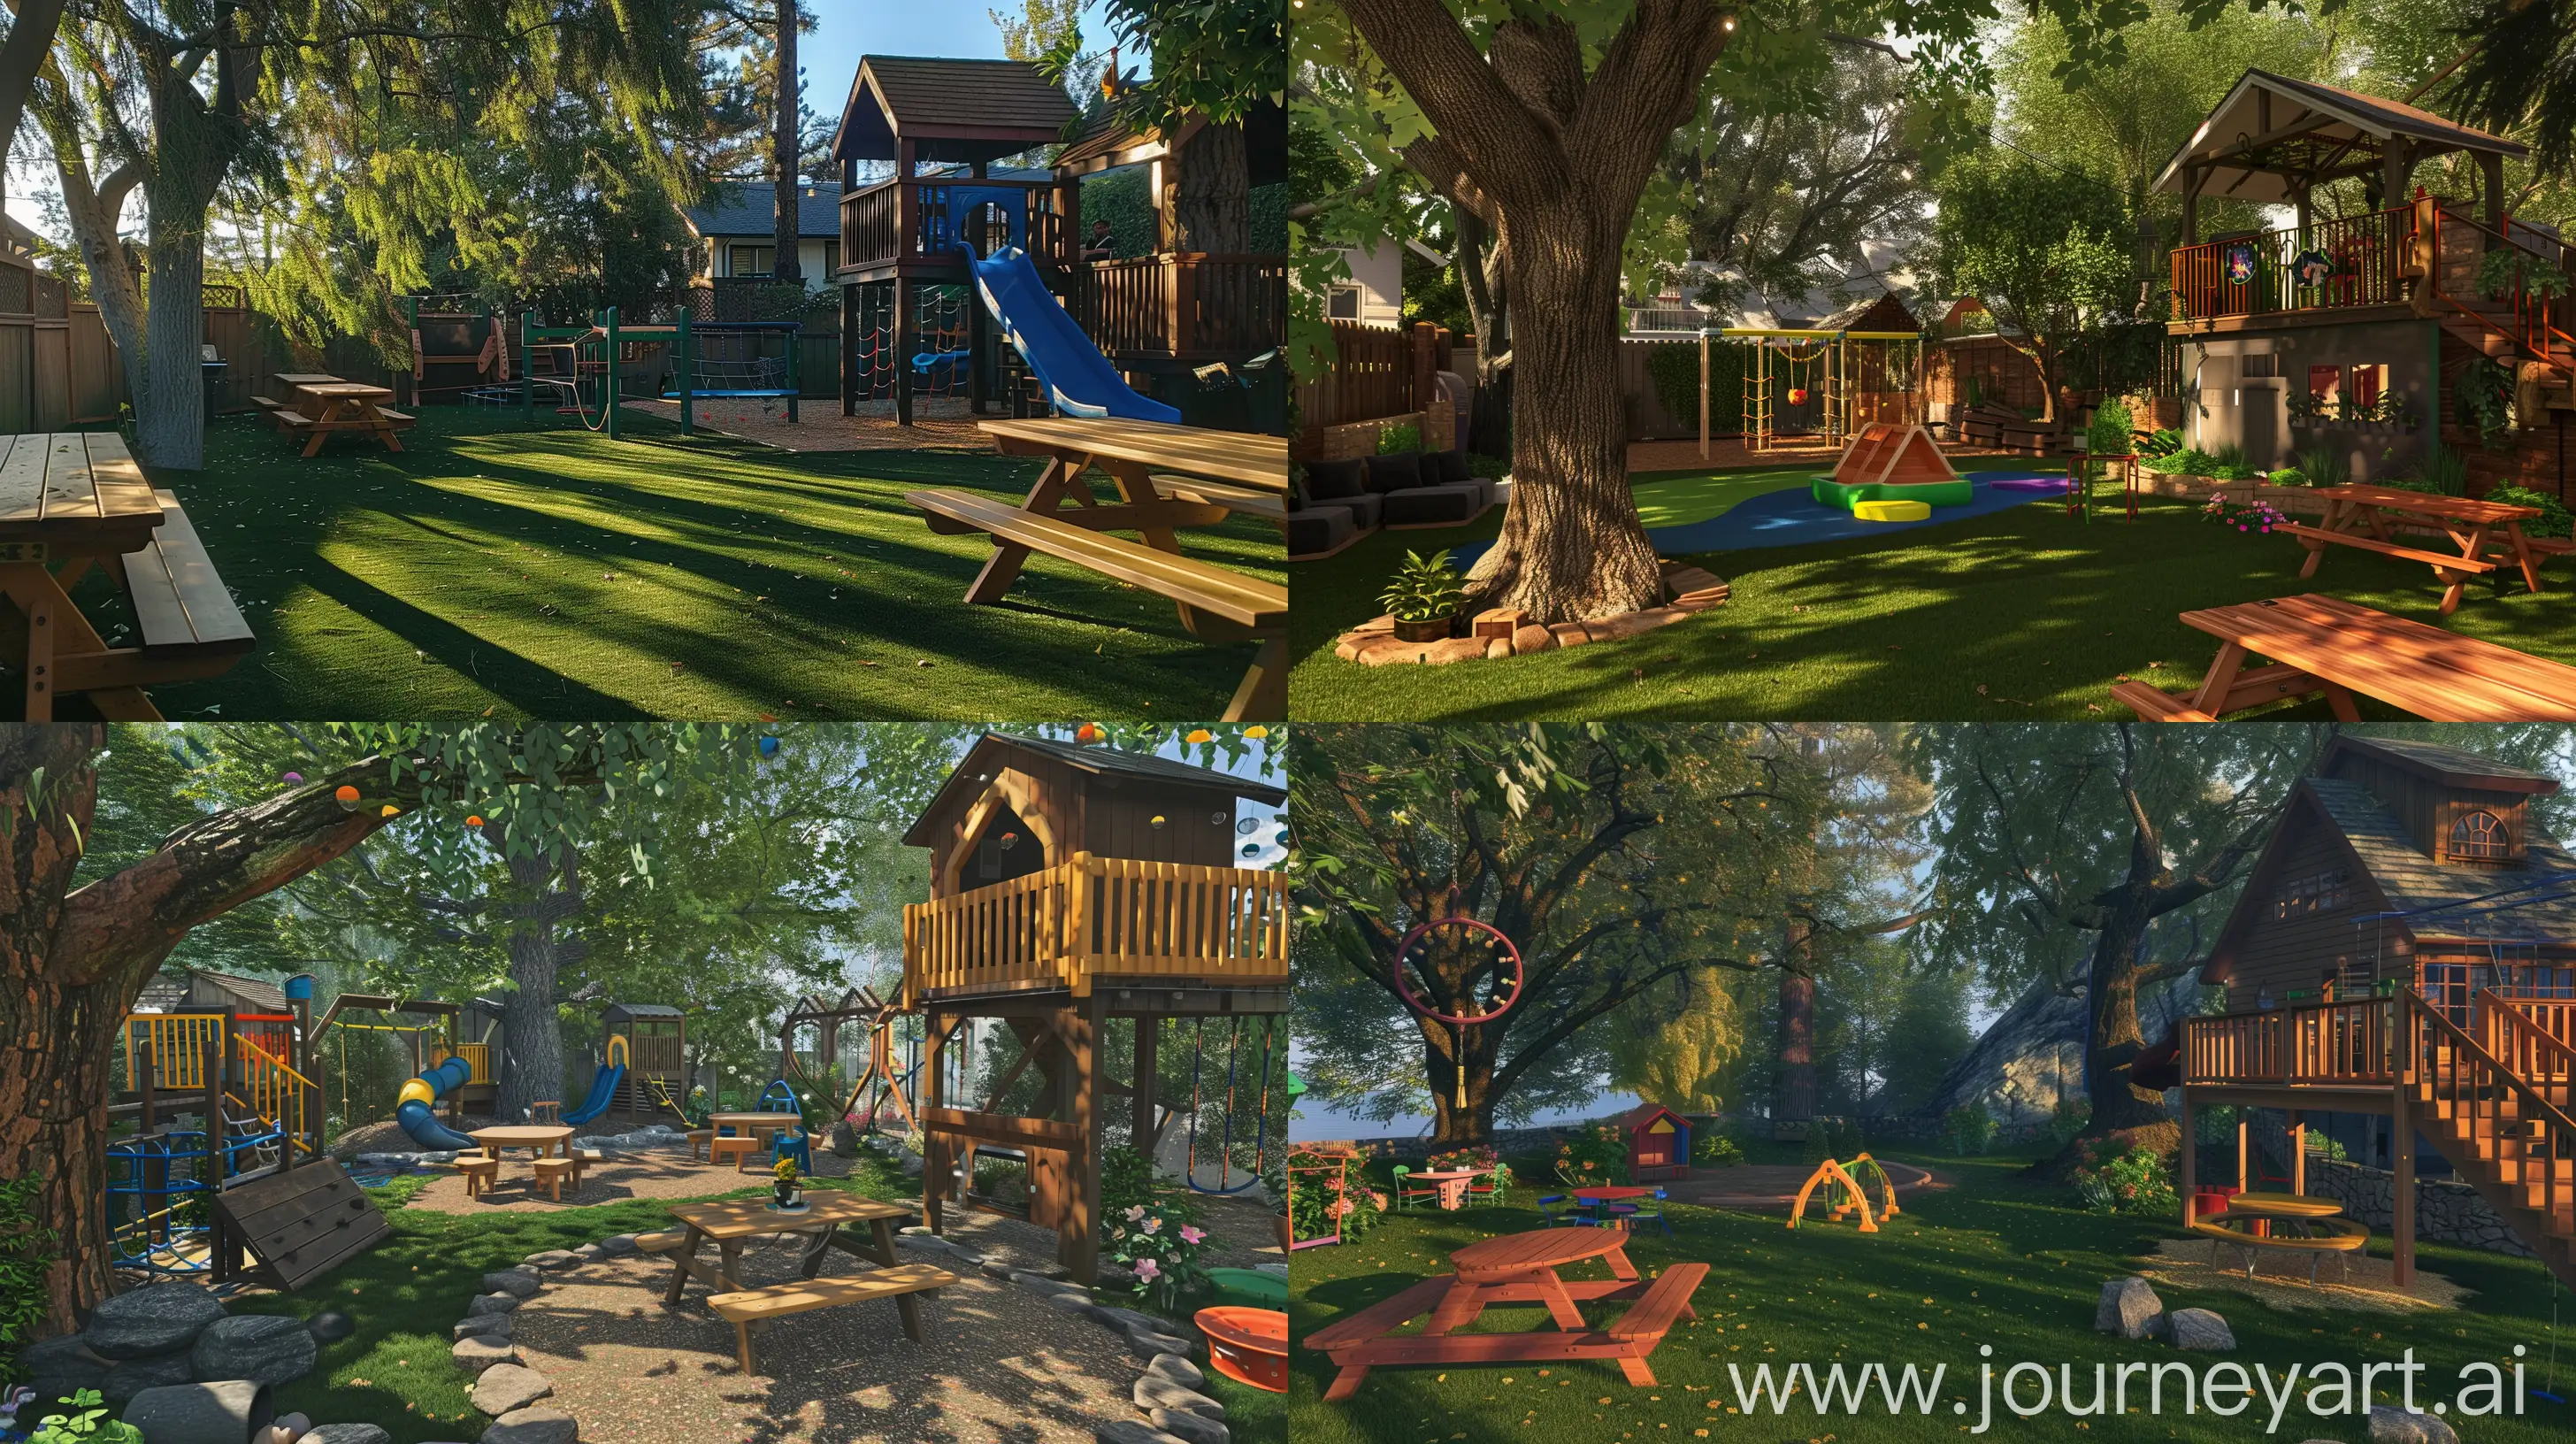 Joyful-Family-Retreat-Backyard-Playground-Oasis-with-Picnic-Tables-and-Treehouse